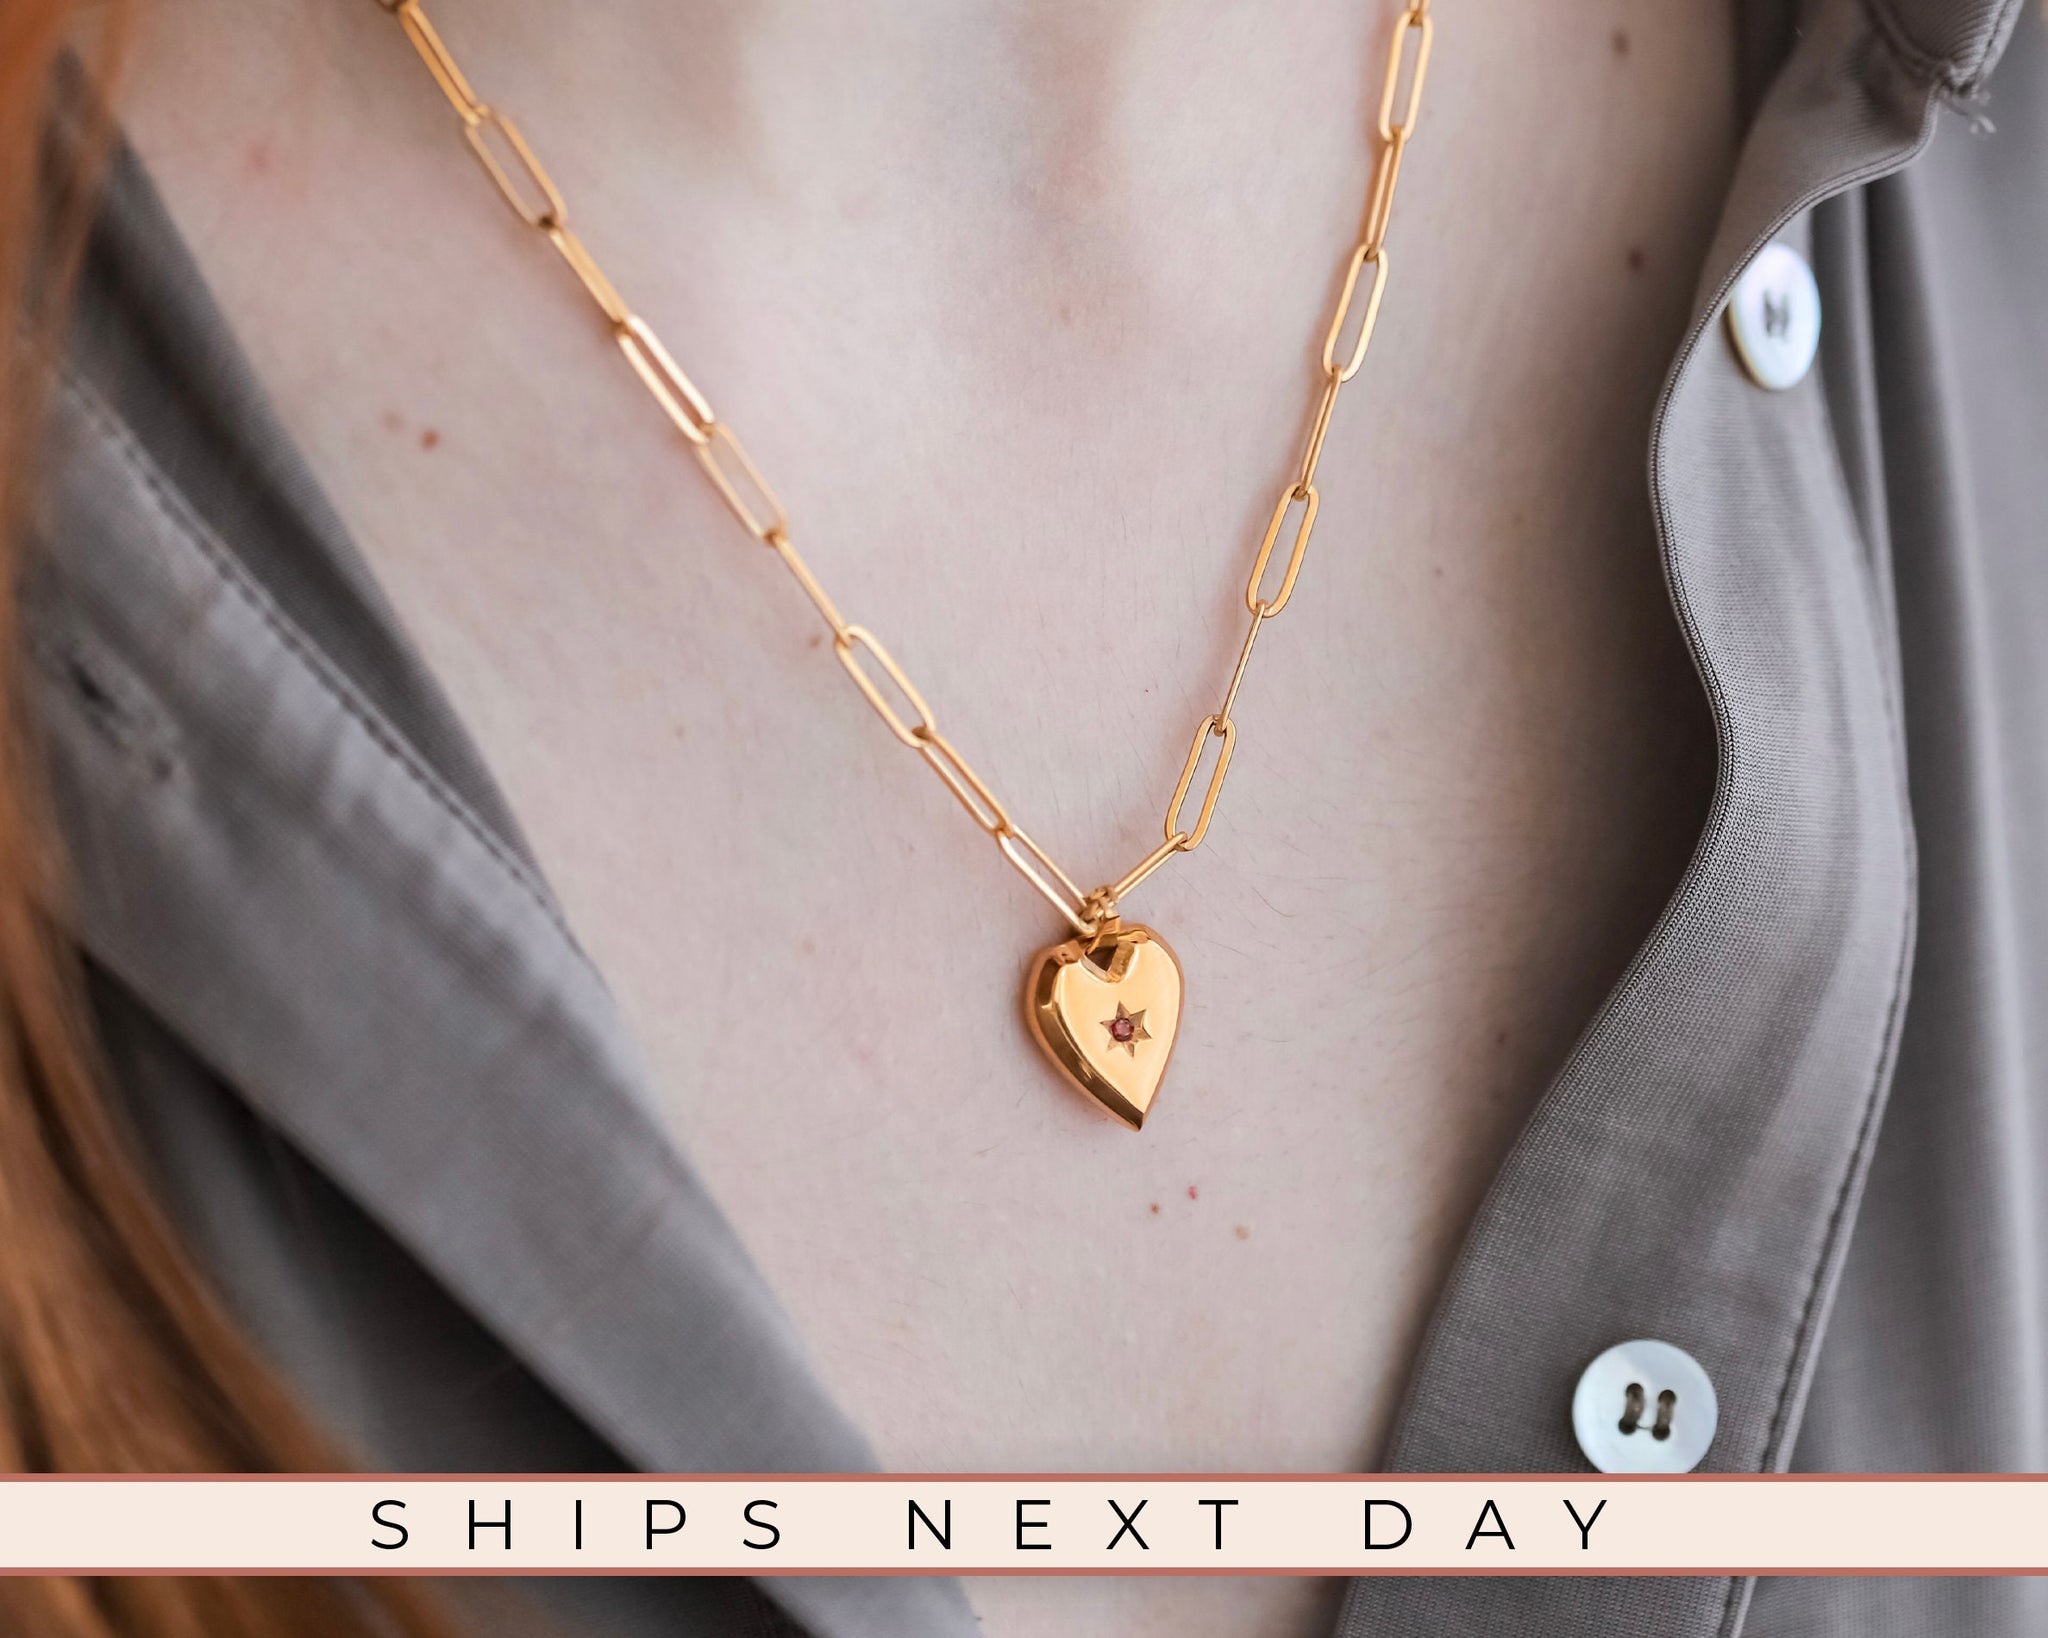 Star Heart Pendant Necklace, 18K Gold, Necklaces For Women, Minimalist Necklace,Paper Pin Stainless Steel Necklace,Gift For Mom,Gift For Her